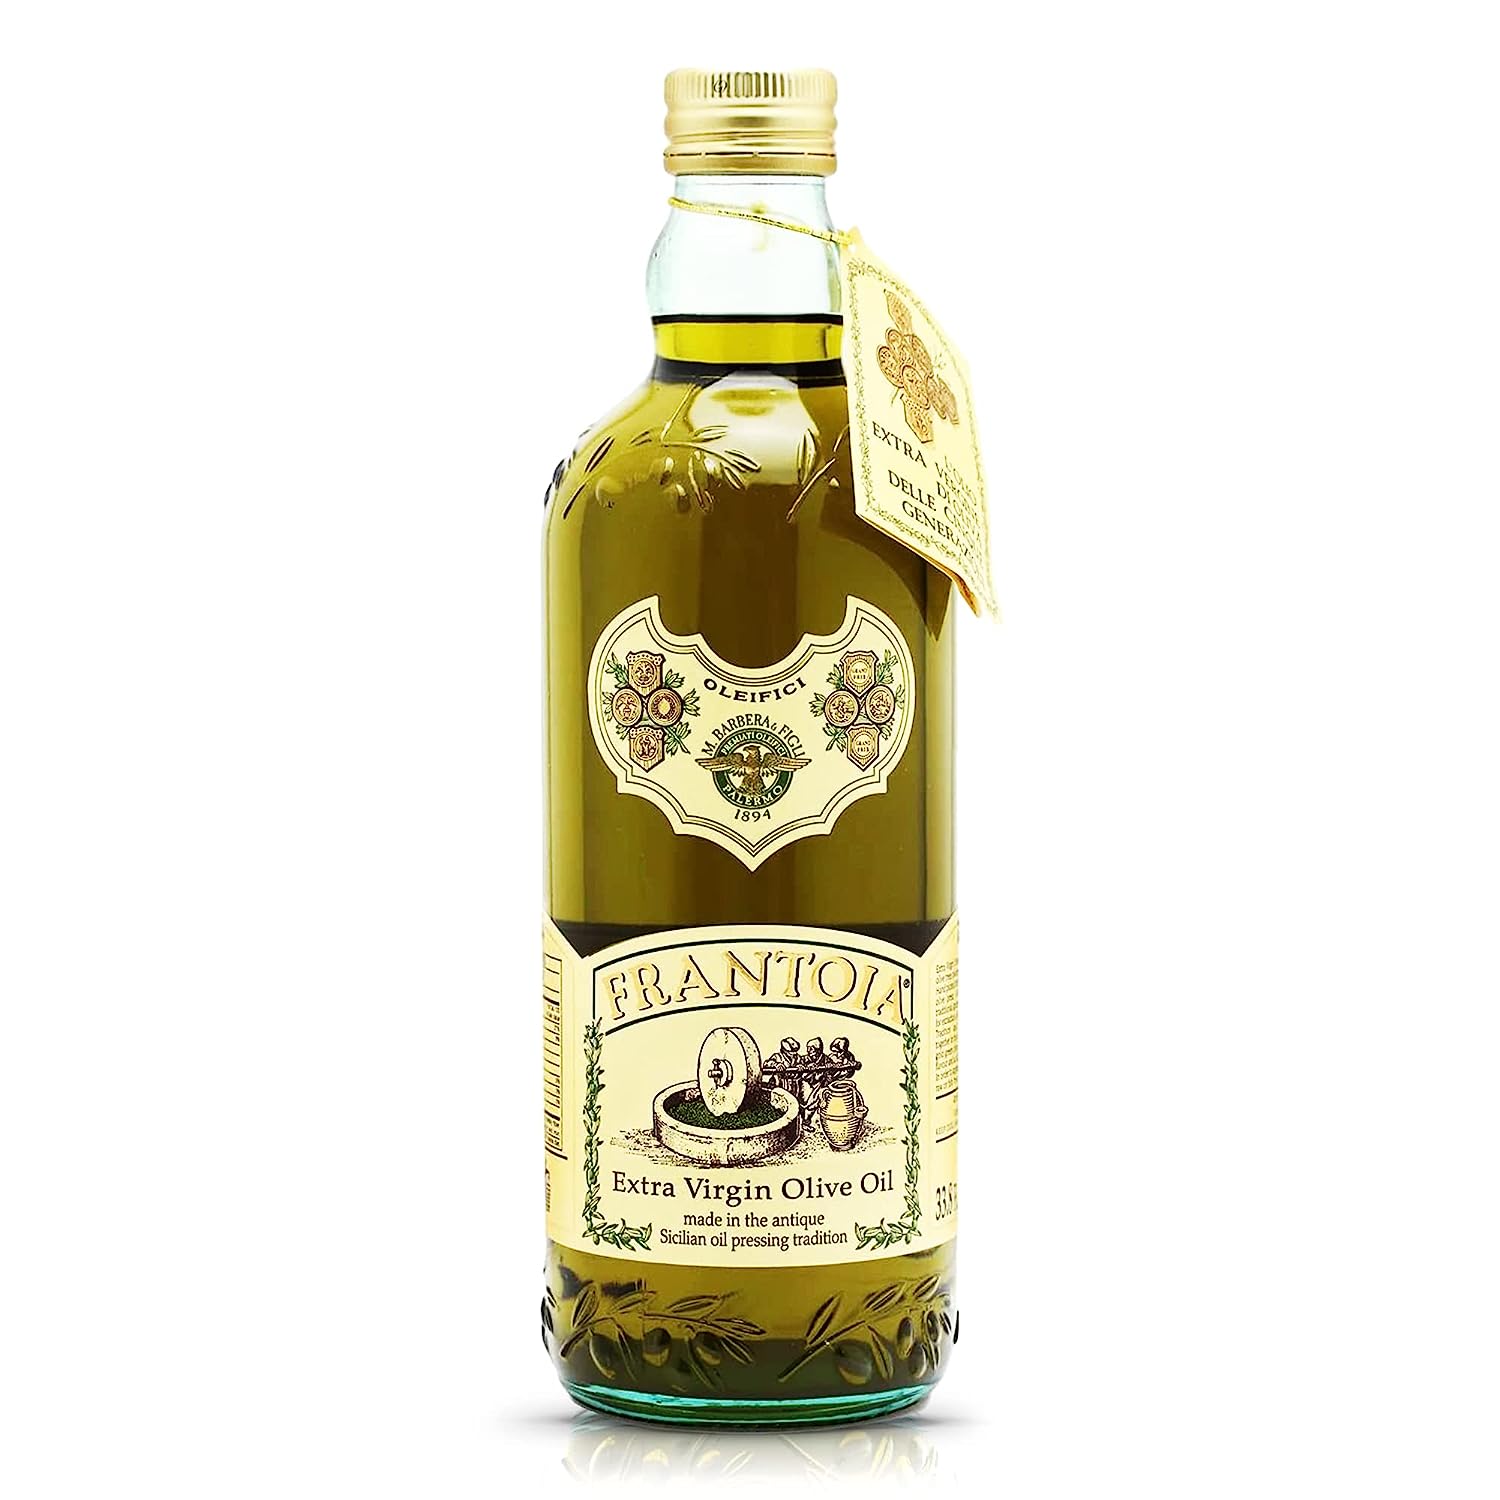 Frantoia Extra Virgin Olive Oil from Italy